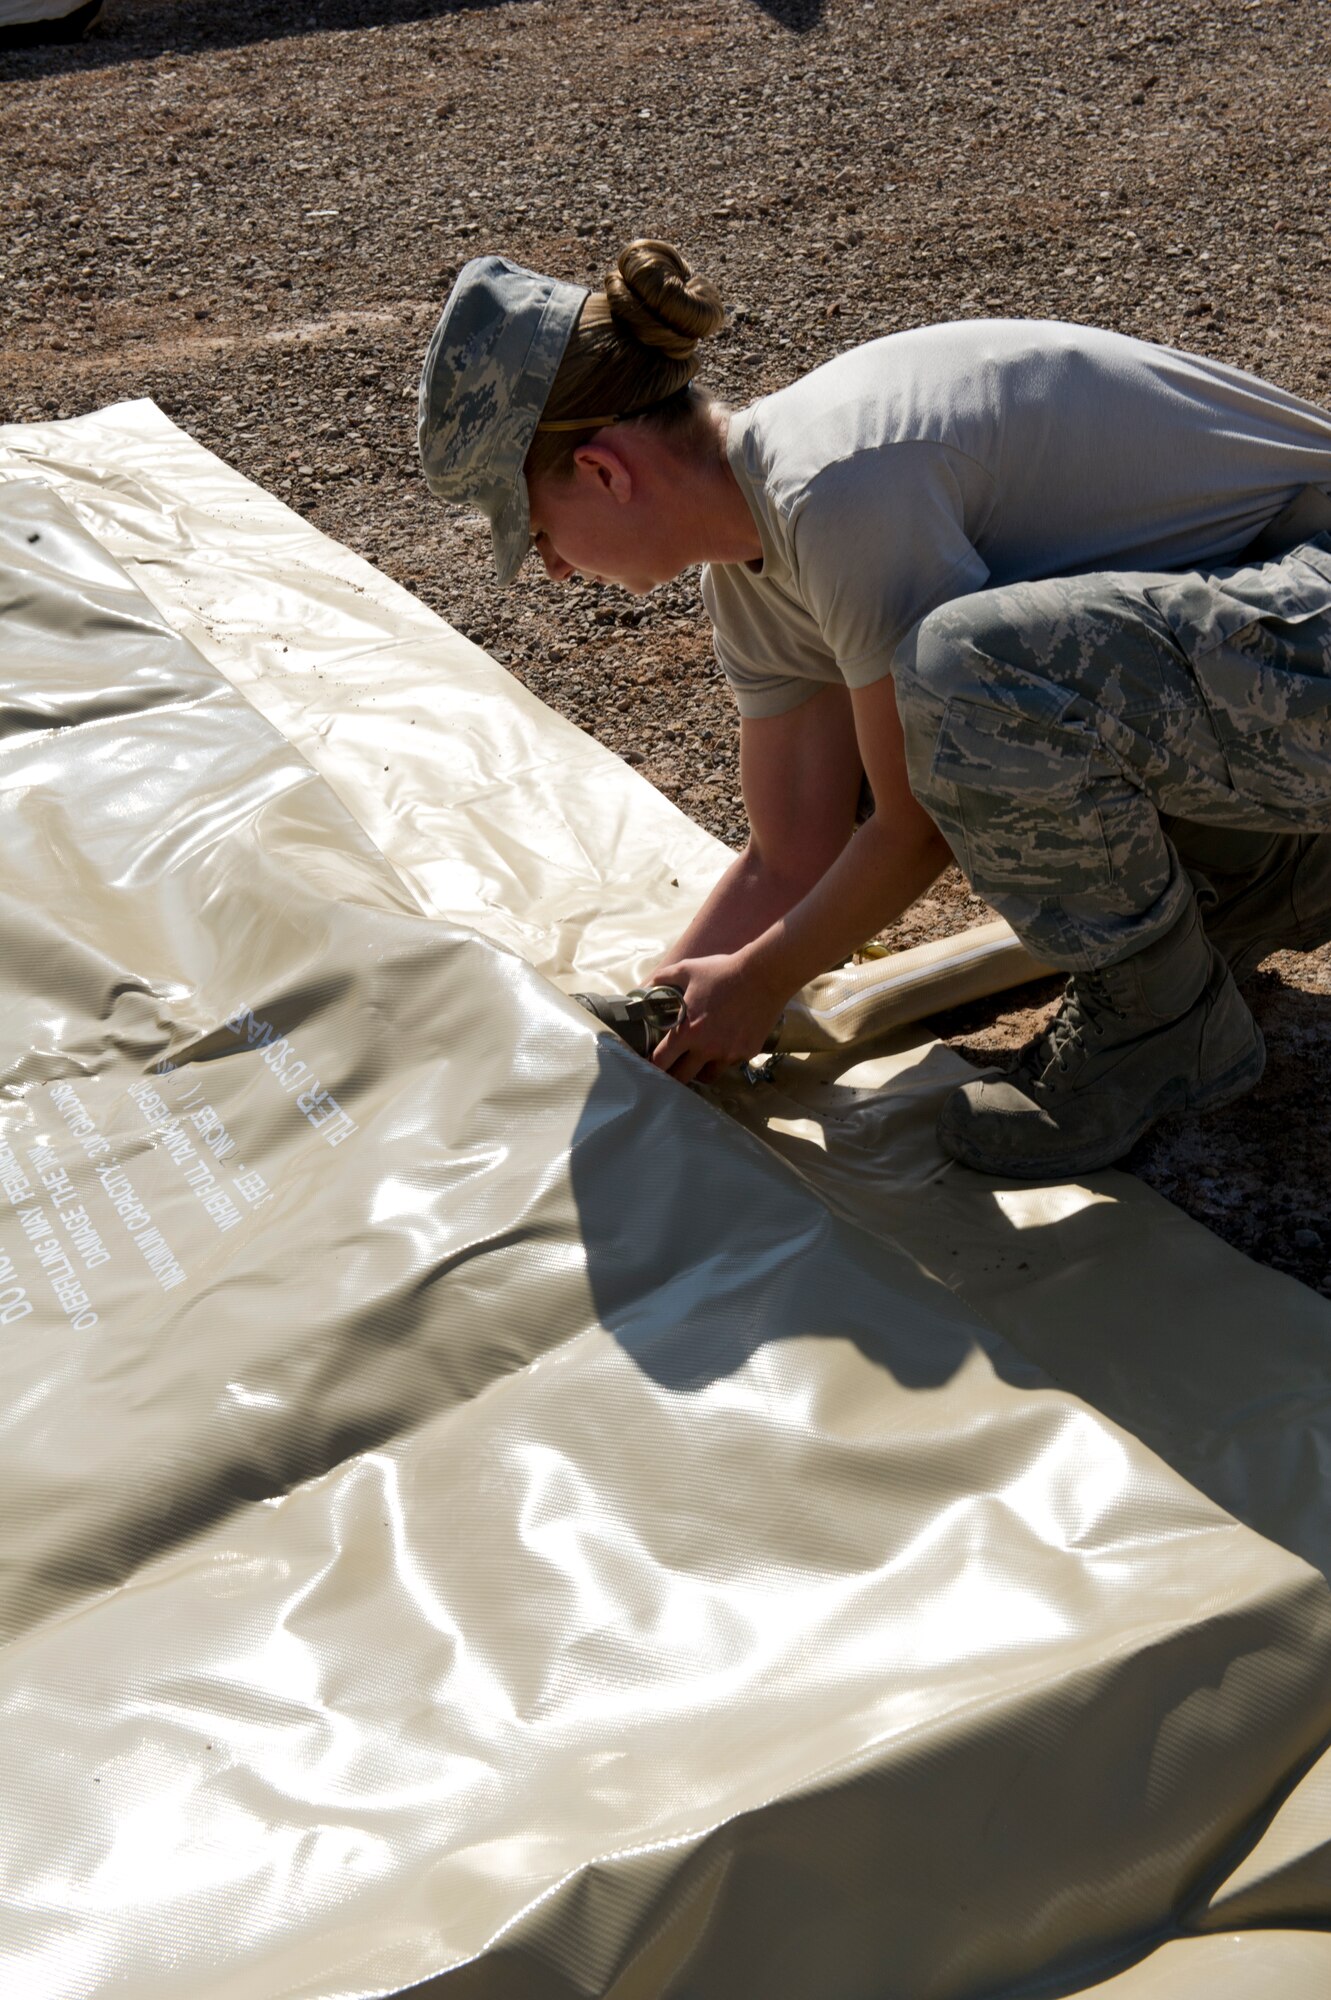 Airman 1st Class Melissa Holmberg, 49th Materiel Maintenance Squadron utilities shop journeyman, adjusts a water line on a storage bladder during a Basic Expeditionary Airfield Resources Base five-day training exercise at Holloman Air Force Base, N.M., July 10. The bladder will supply water to a deployed shower facility. (U.S. Air Force photo by Senior Airman Kasey Close/Released)